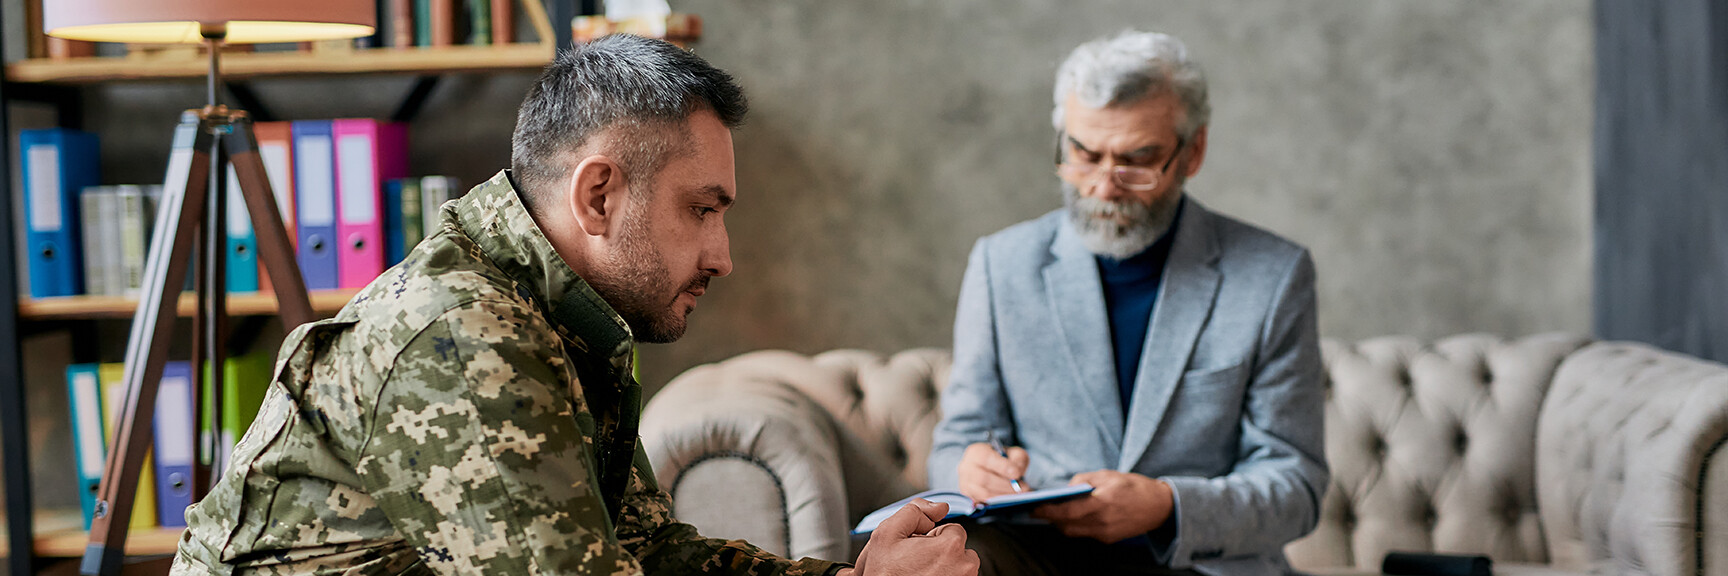 A person sitting in a therapy session, with a therapist listening attentively, providing support for someone with PTSD.